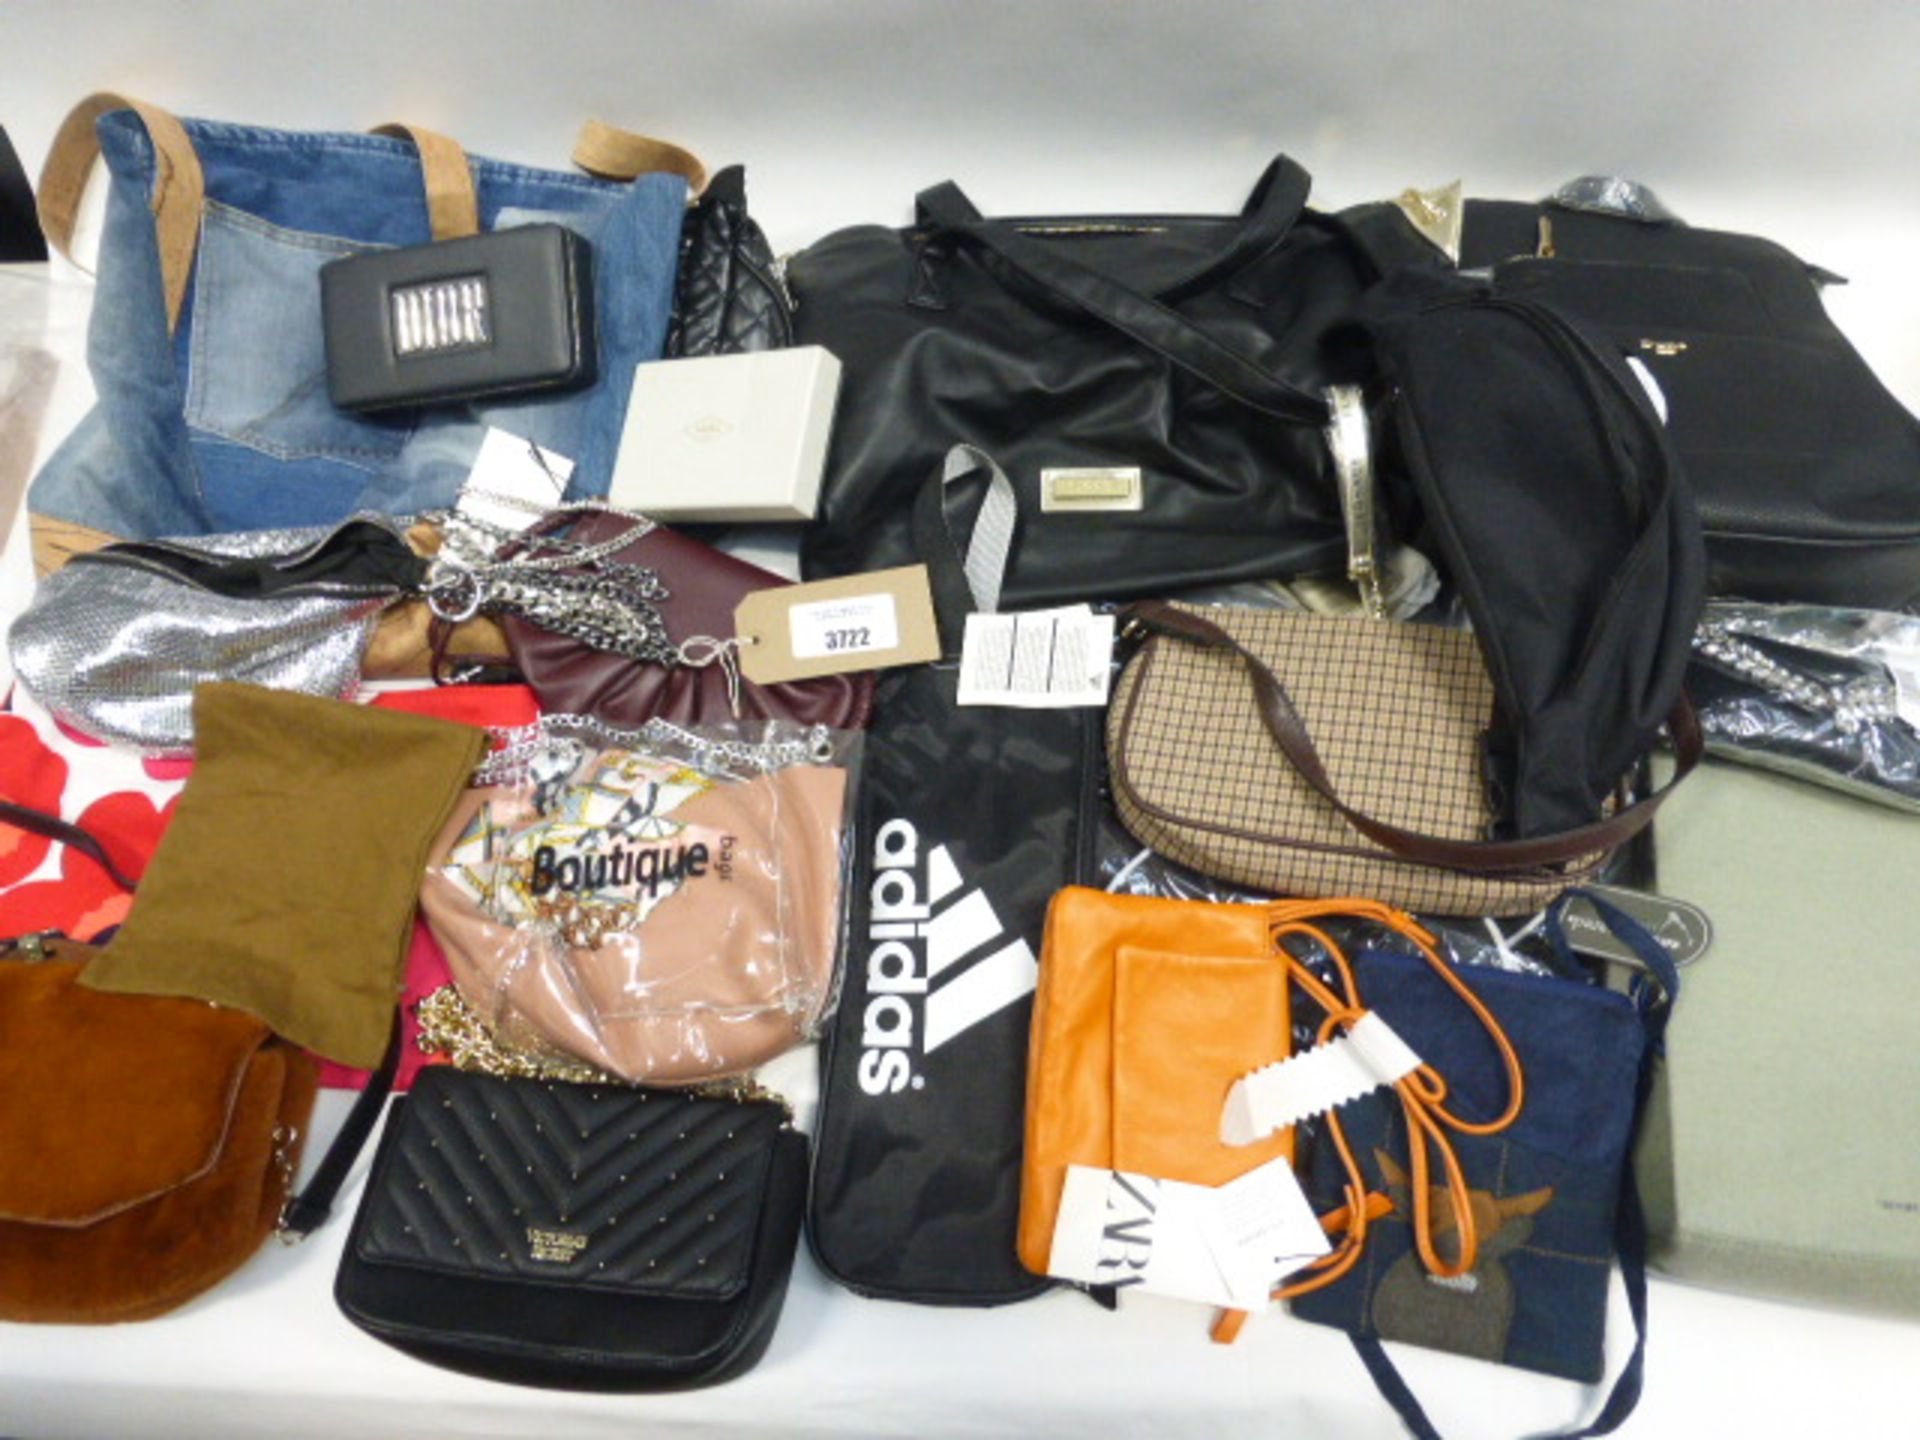 Large bag containing hand bags, ruck sacks, purses and wallets in various sizes